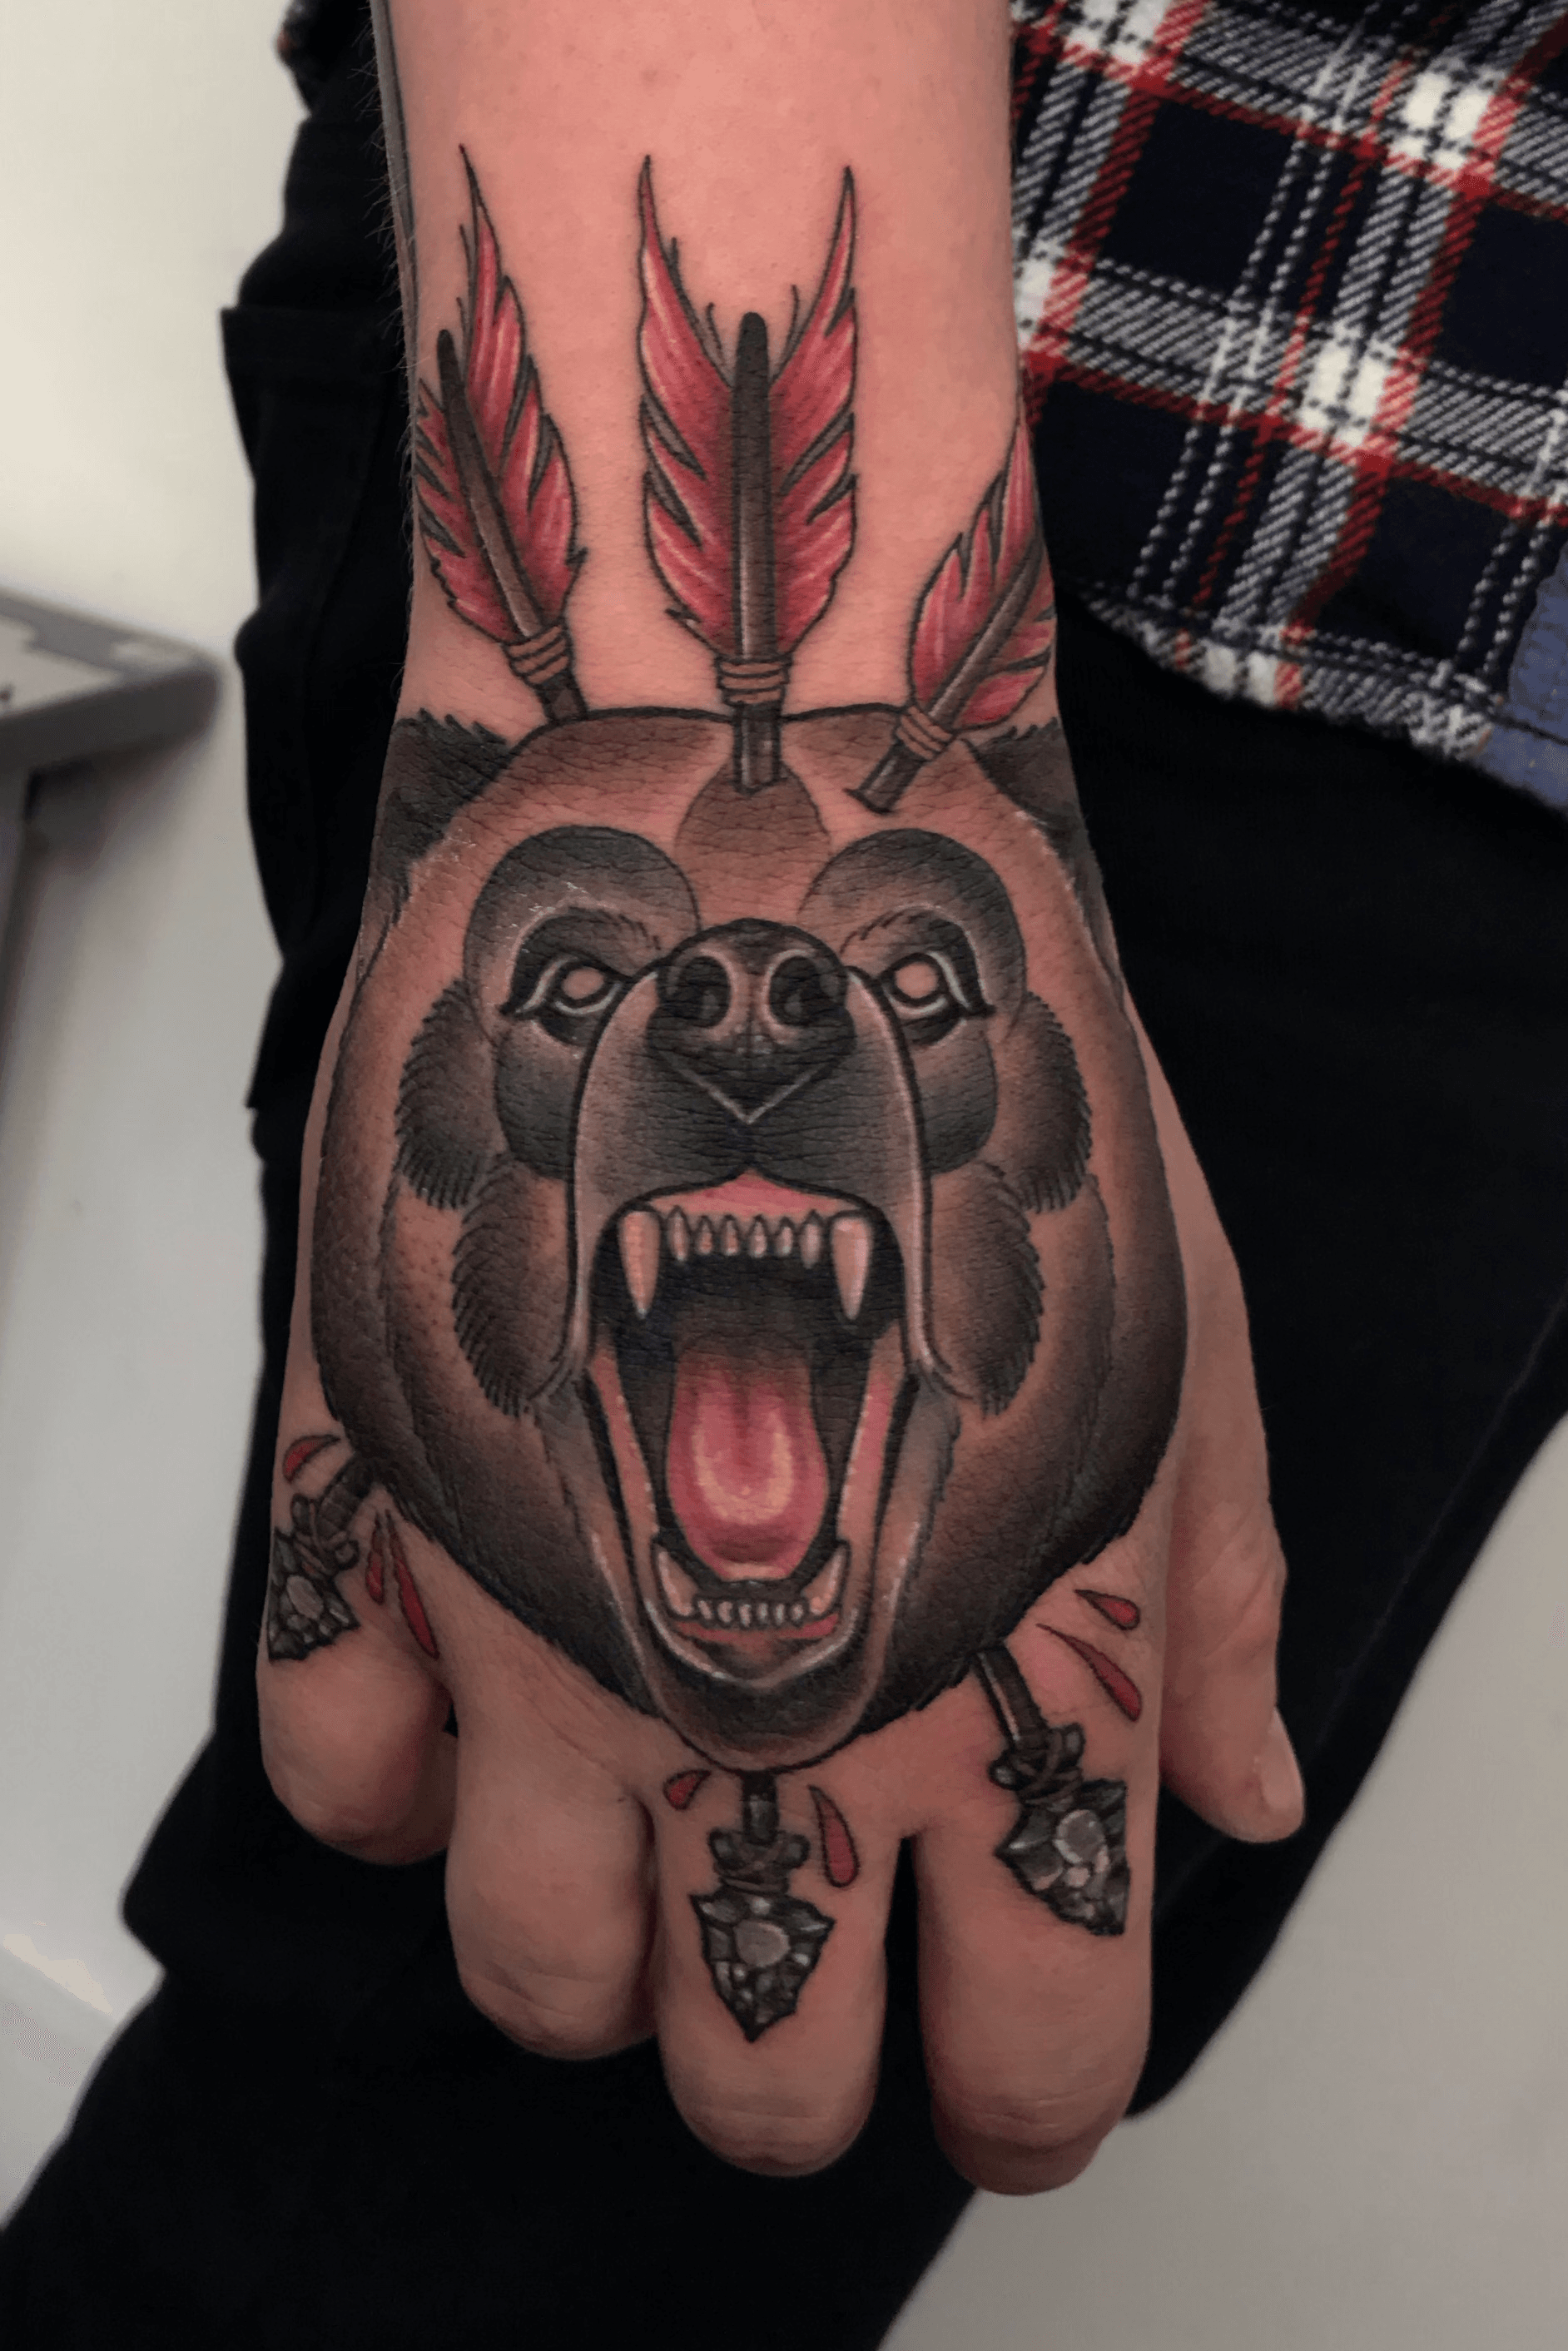 Marked One Tattoo Studio  Grizzly bear hand by Adam  M A R K E D O  N E TATTOOSTUDIO For bookings get in touch wwwmarkedonetattoocom Email   bookmeinmarkedonetattoocom Facebook 